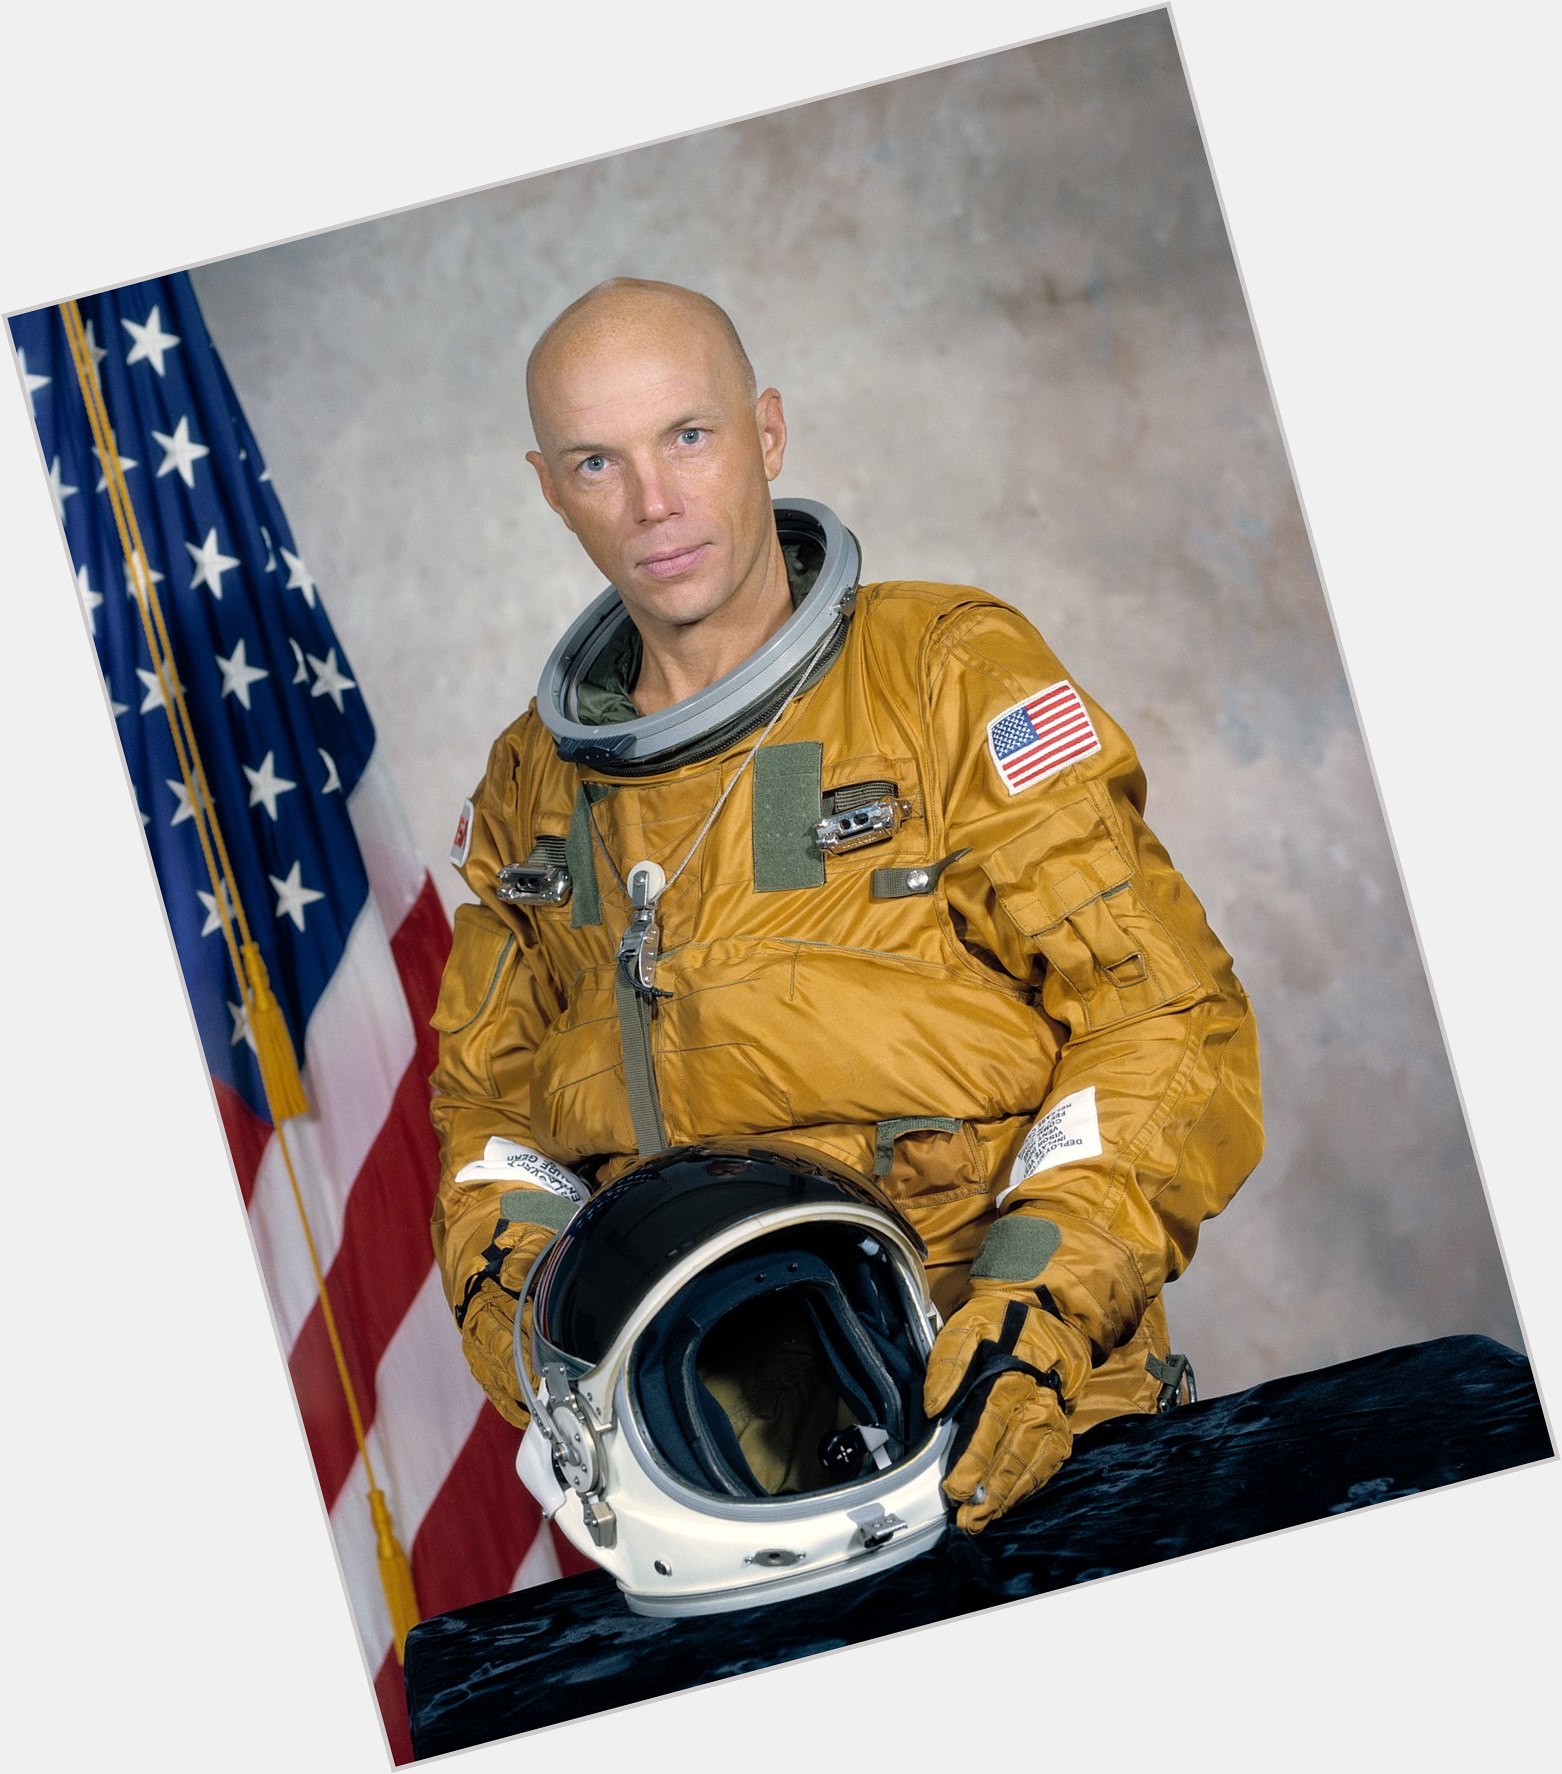 Story Musgrave dating 2